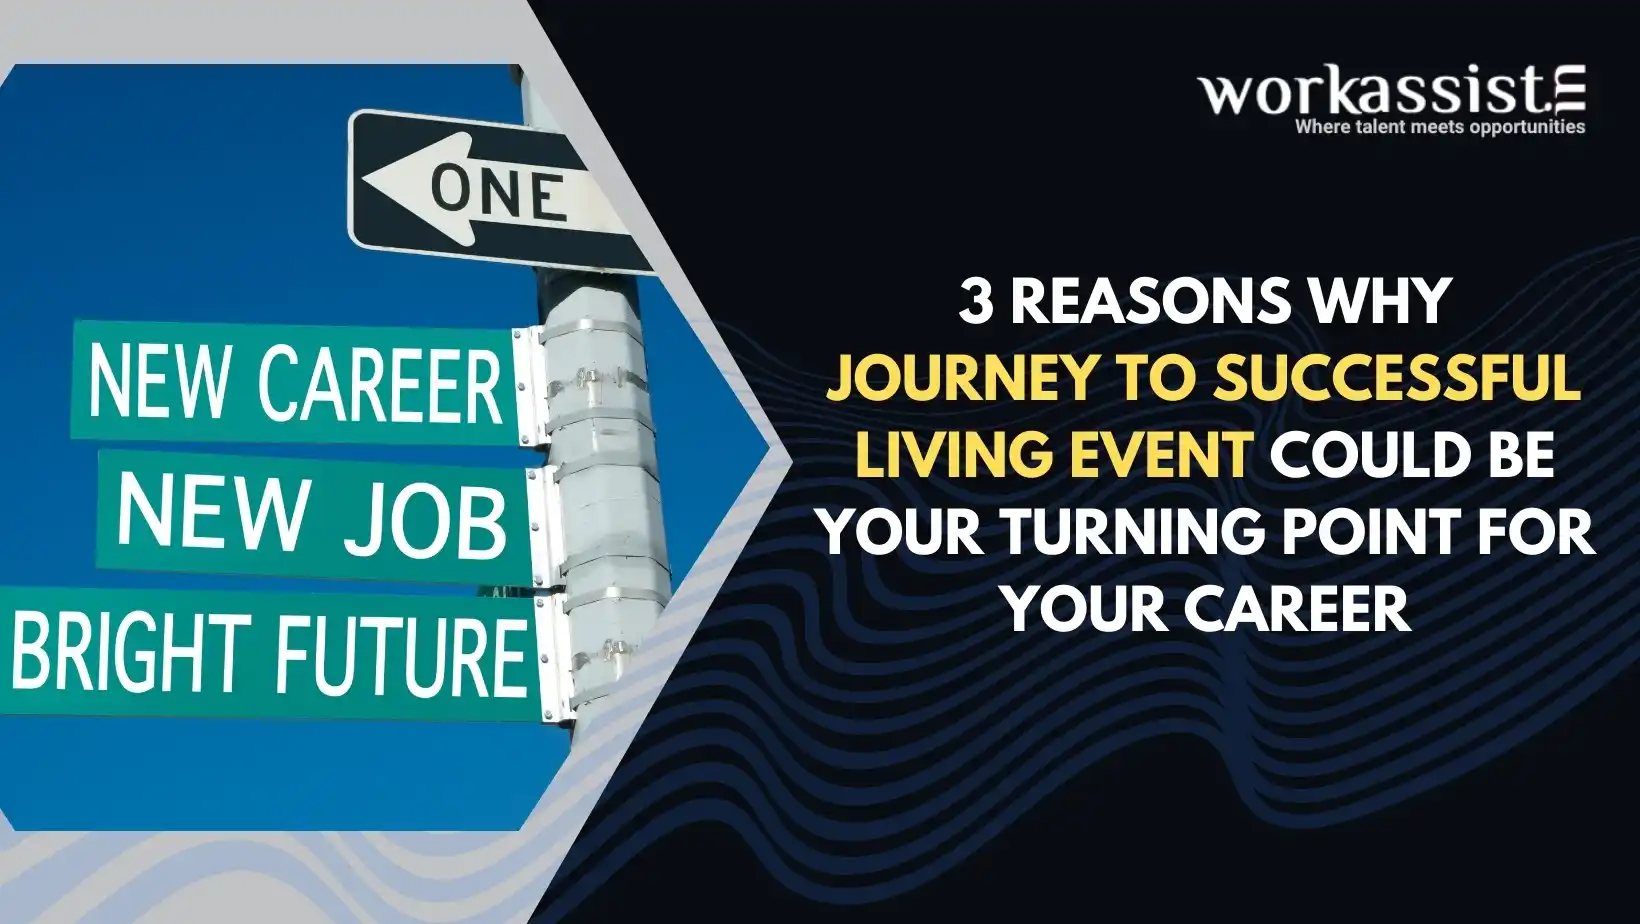 3 Reasons Why Journey To Successful Living Event Could Be Your Turning Point for your Career